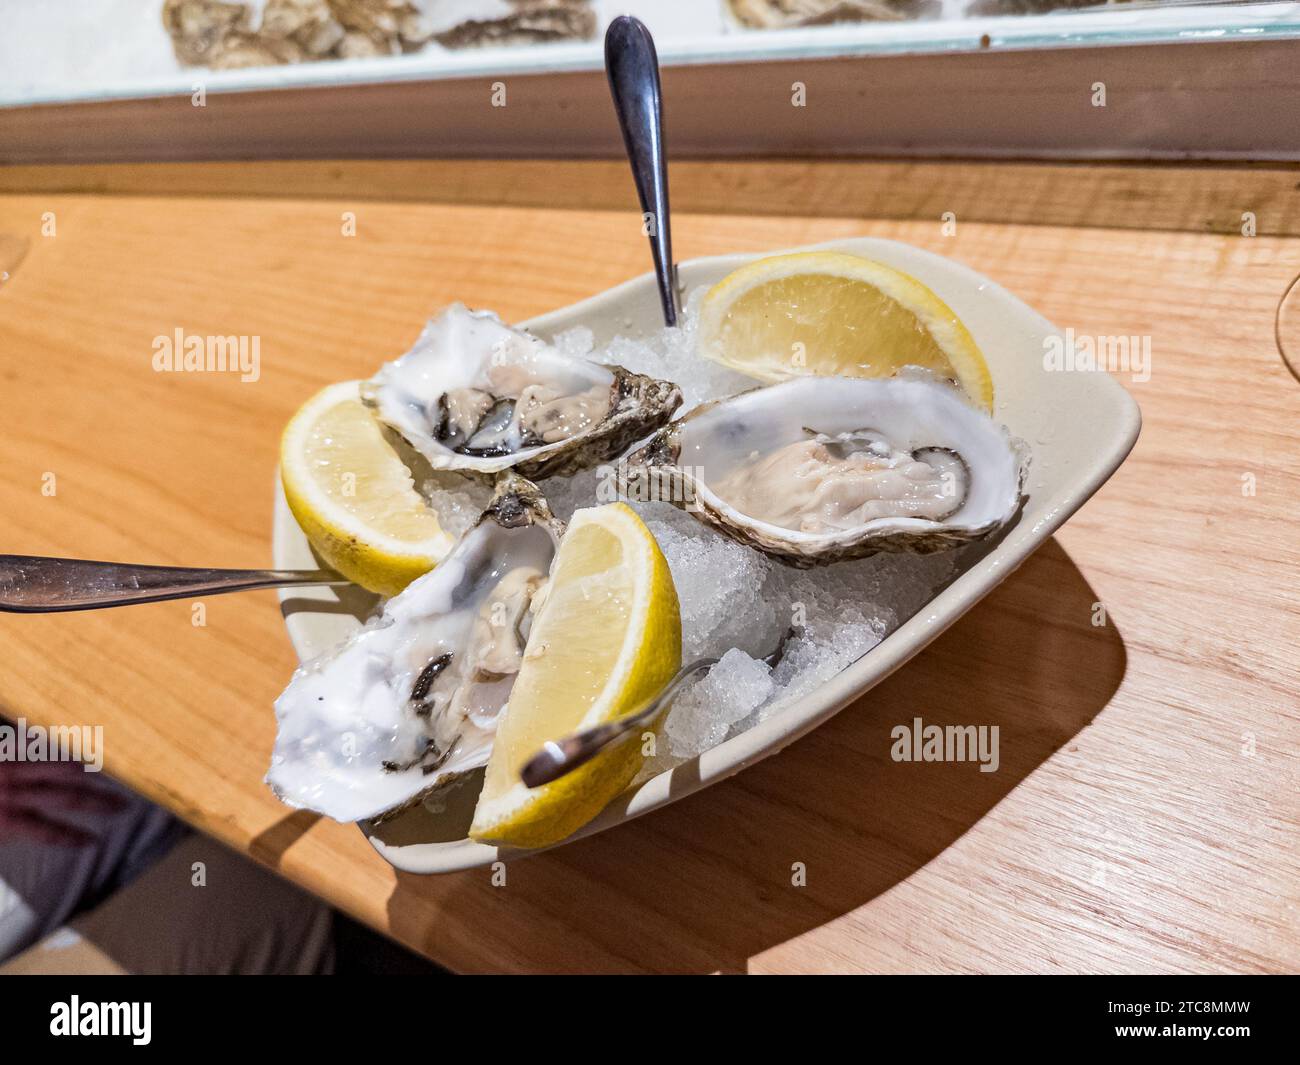 Delicious raw oysters on the half shell at a restaurant Stock Photo